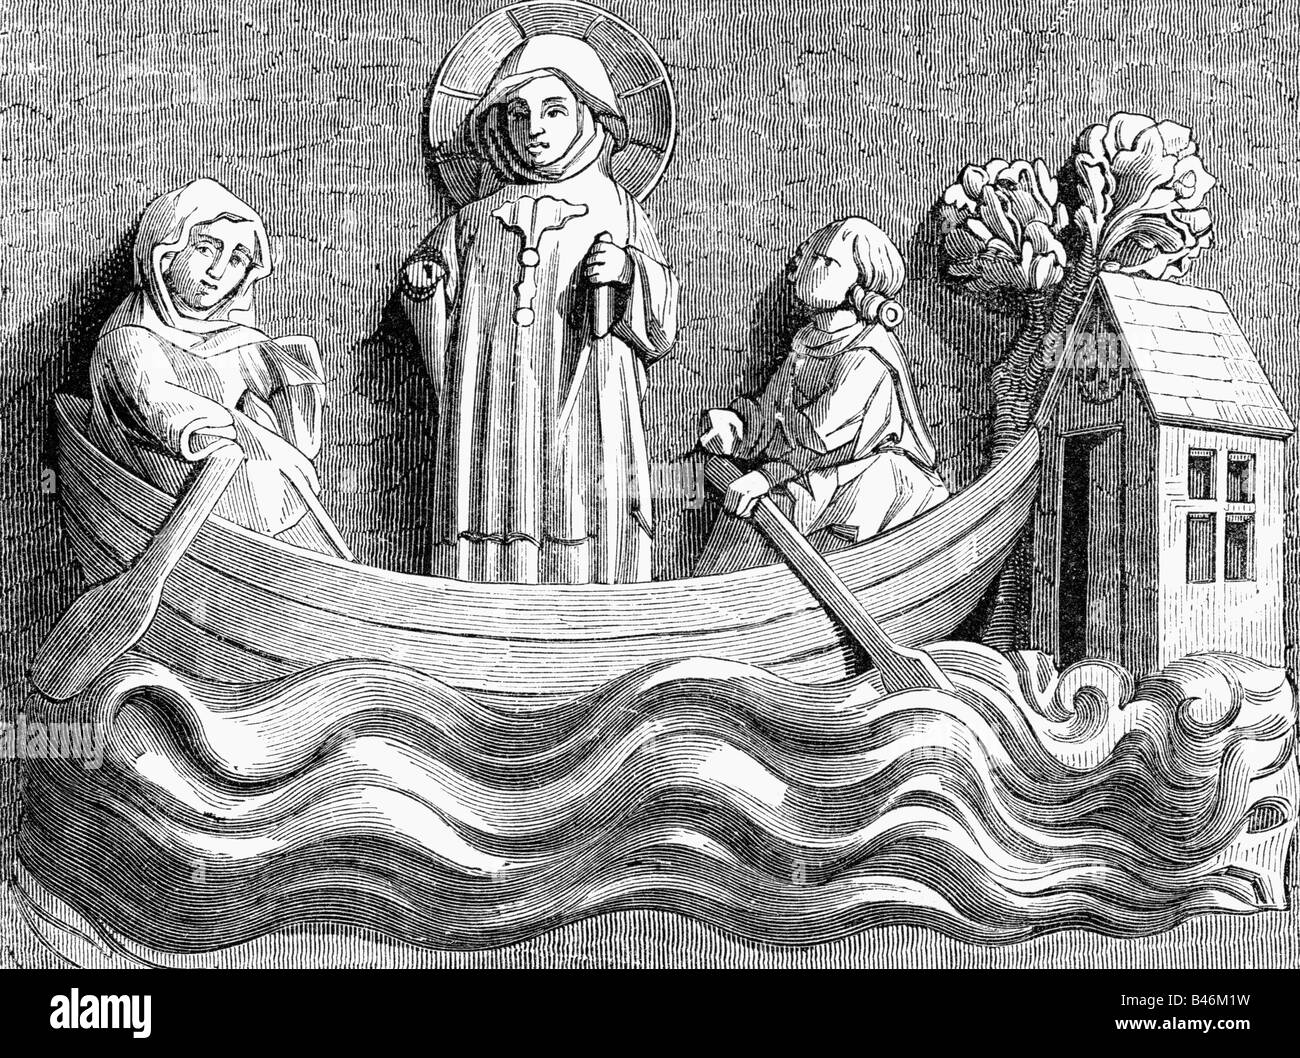 religion, christianity, Jesus Christ in guise of a leper is taken with boat by Saints Julian and Basilissa, relief, porch, Saint Julien de Pauvre, Paris, 13th century, wood engraving, 19th century, leprosy, middle ages, skulpture, Romansque, France, historic, historical, medieval, people, Stock Photo